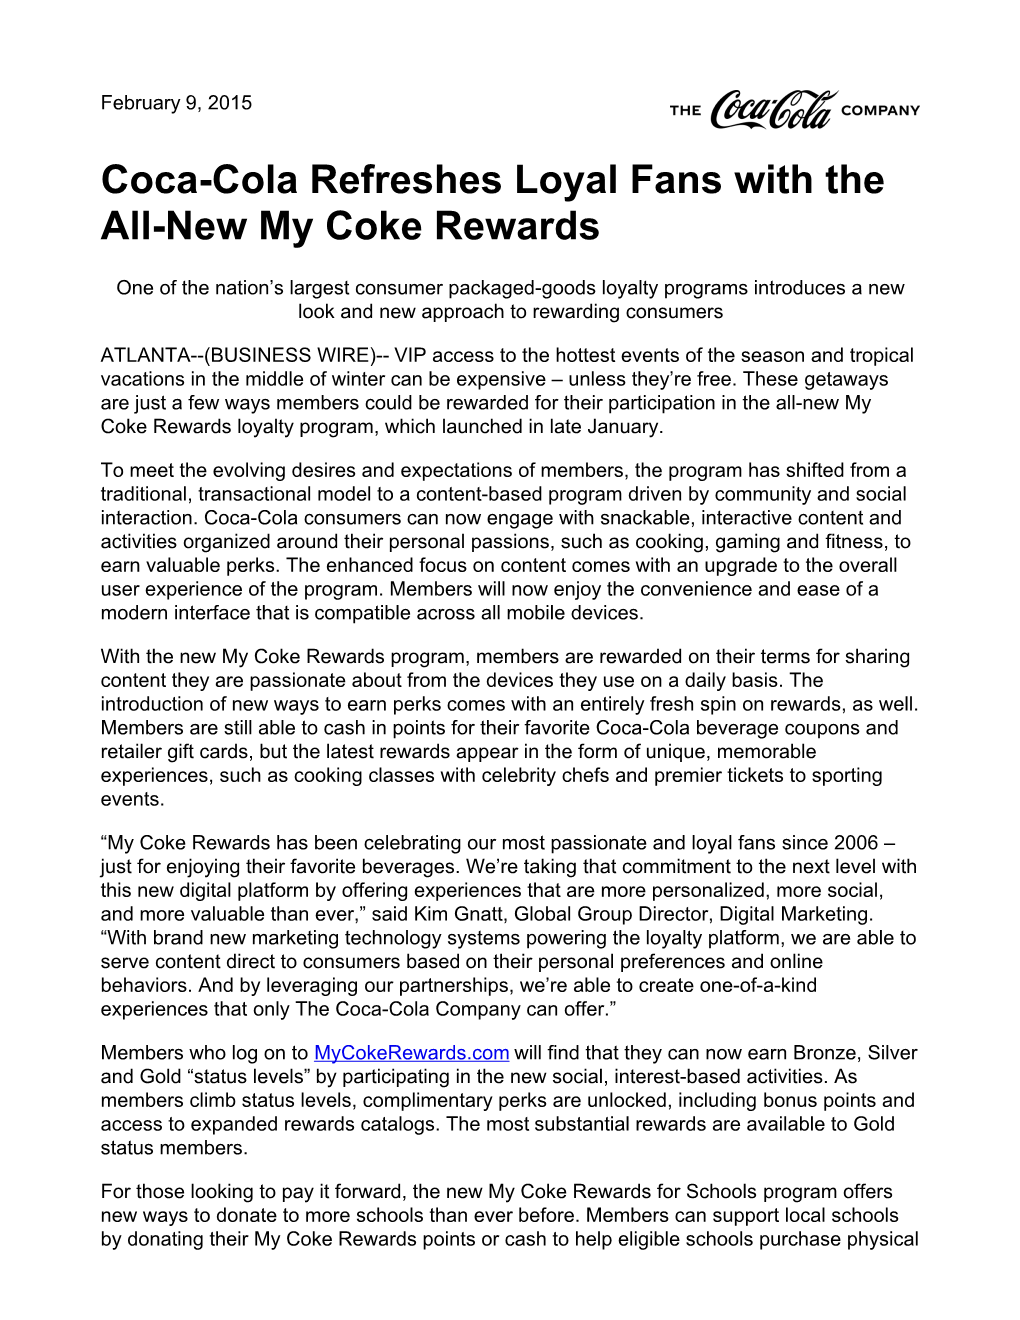 Coca-Cola Refreshes Loyal Fans with the All-New My Coke Rewards